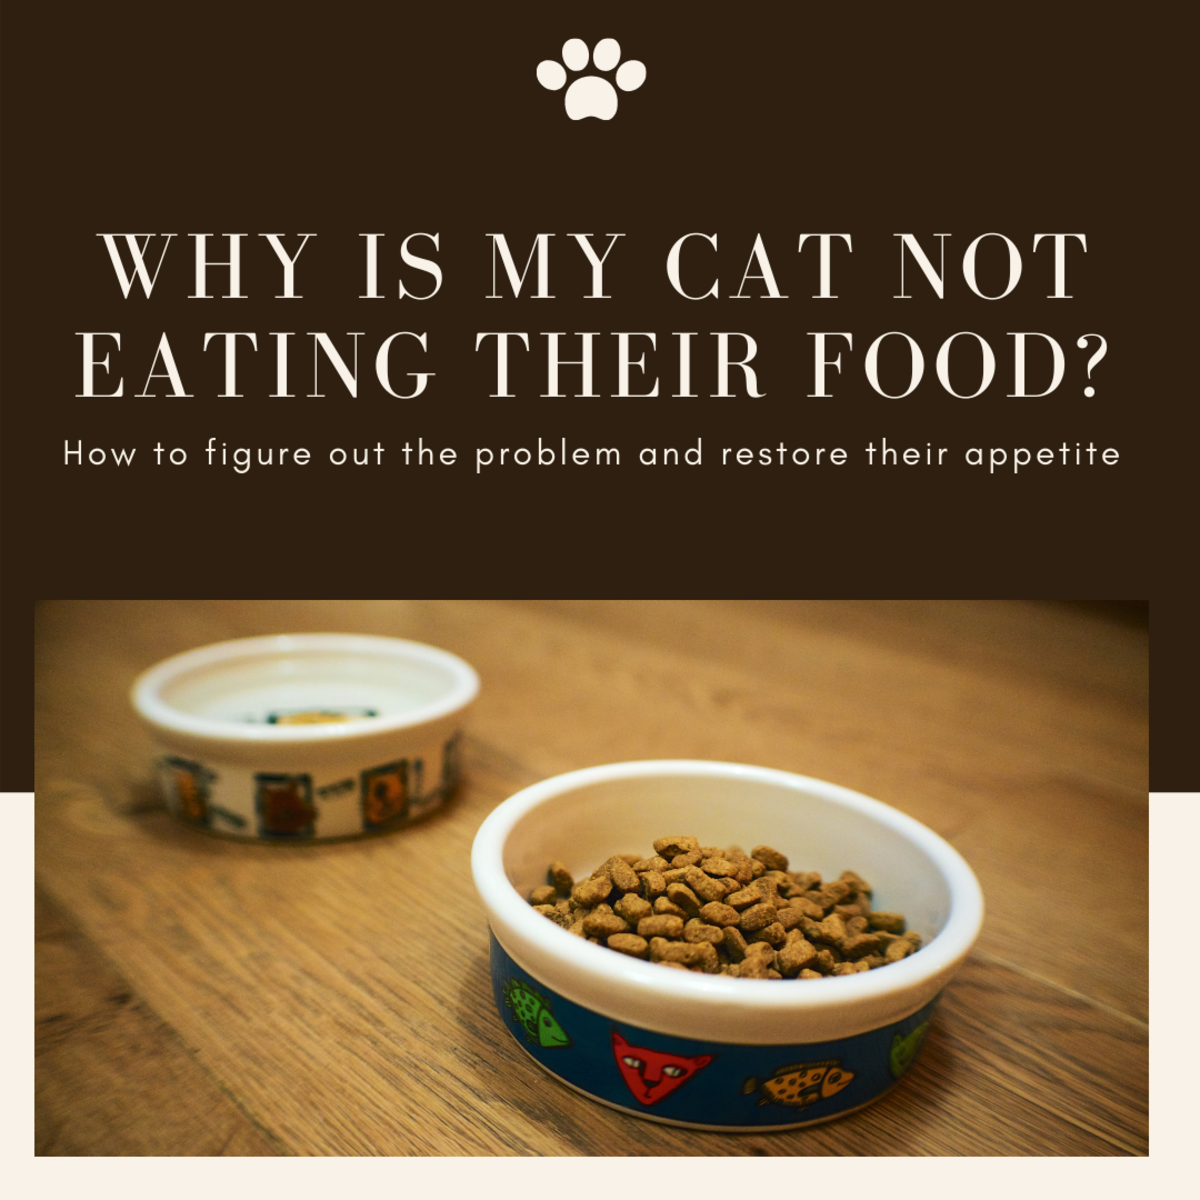 This article will help you troubleshoot why your cat may not be eating and provide options for what you can do to help restore their appetite.